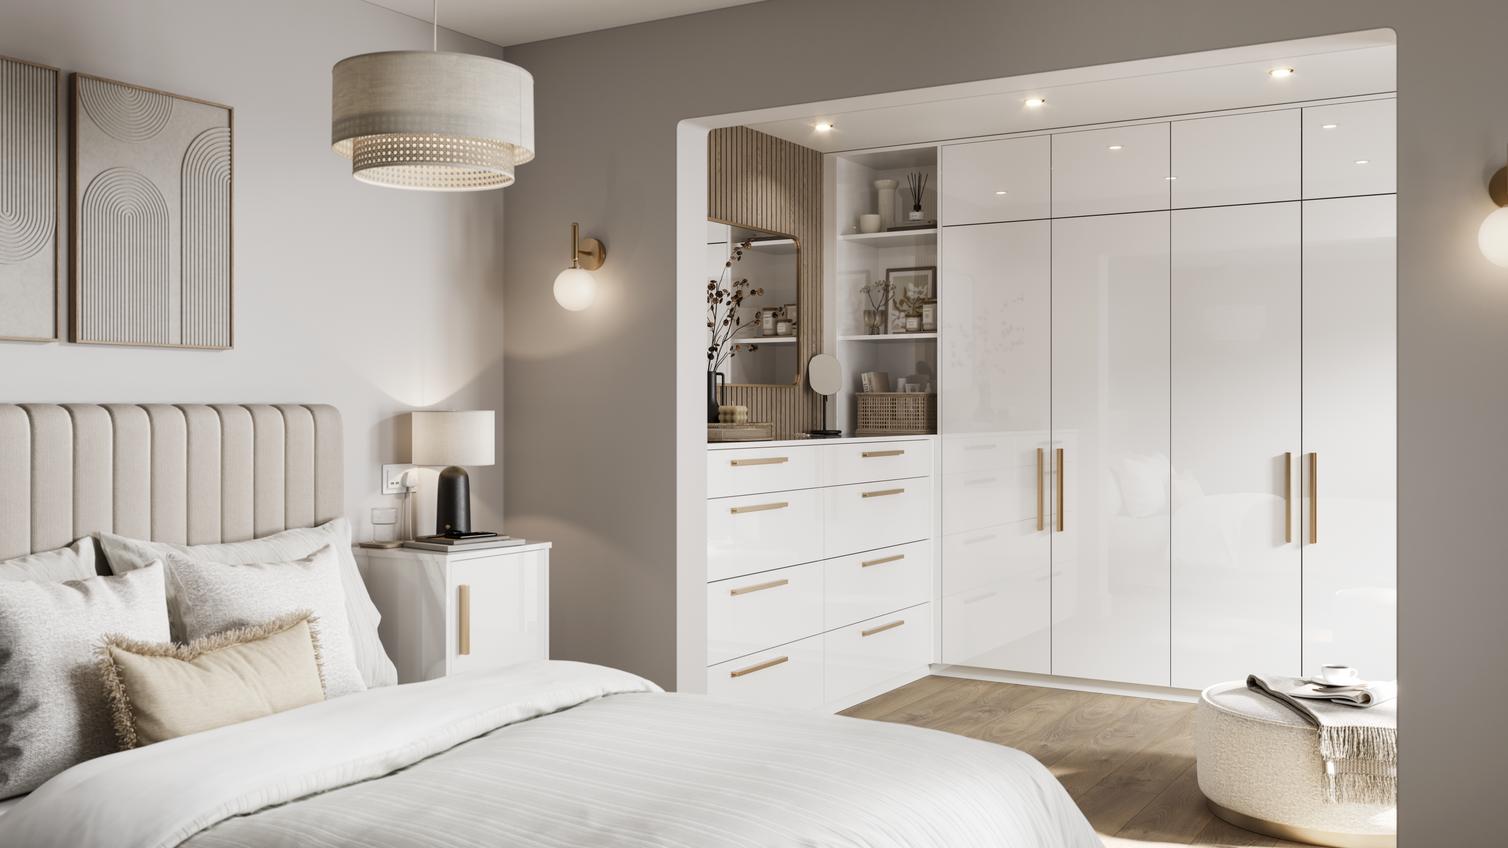 Hockley Gloss White Main Set Shot Warderobe, Chest Of Drawers, and Bedside Table